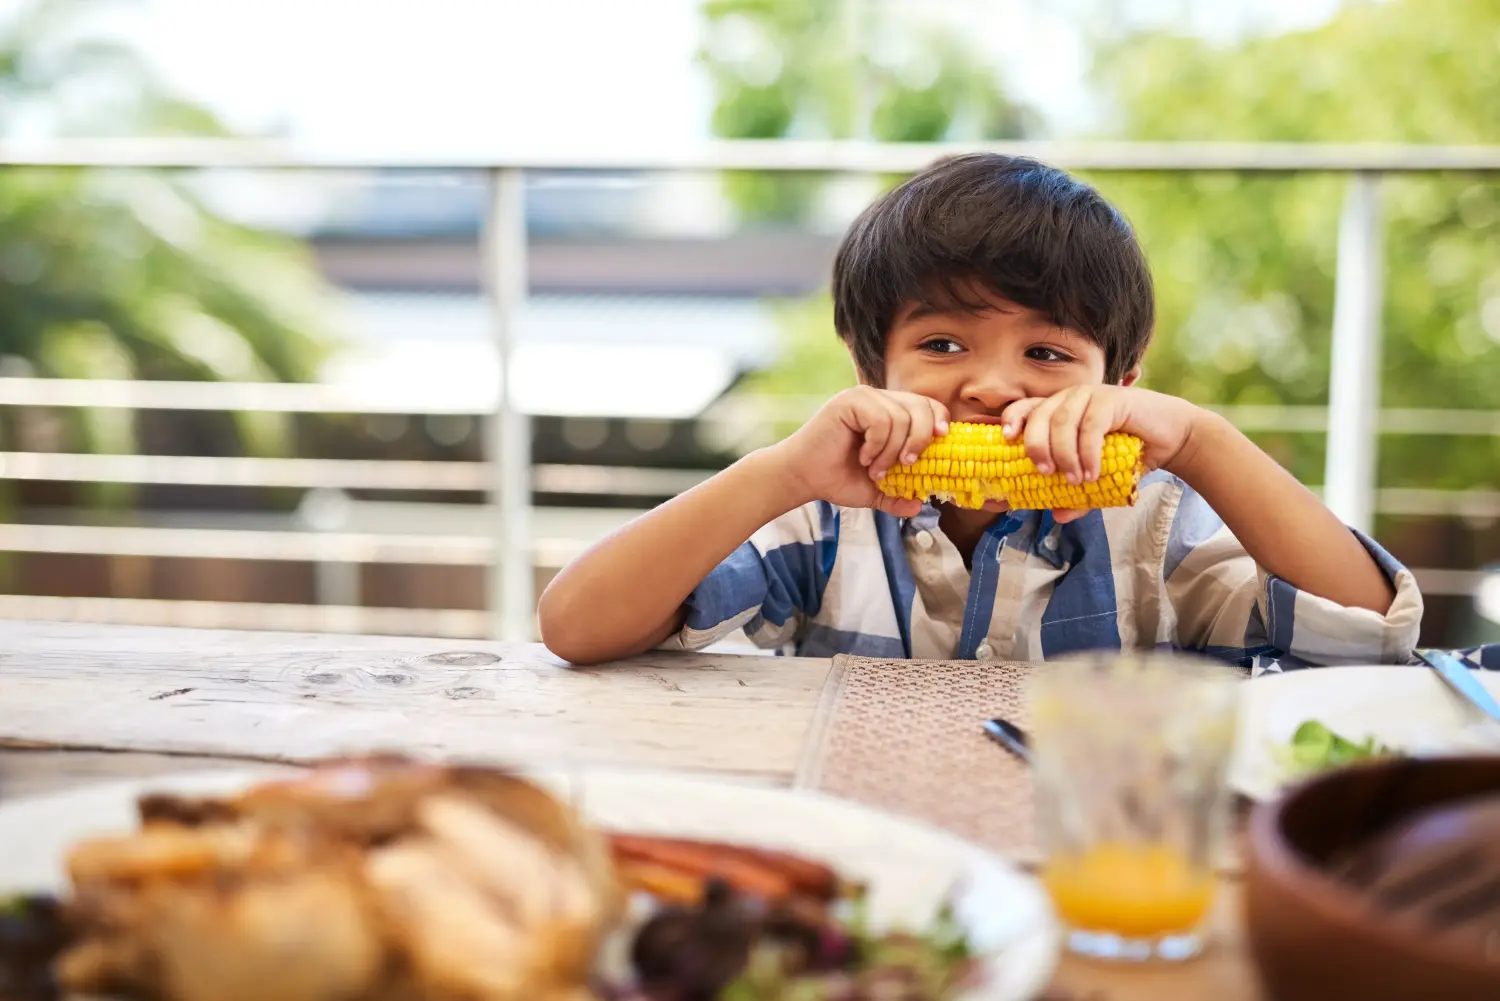 Shot of an adorable little boy eating a cob of corn around a table outdoors